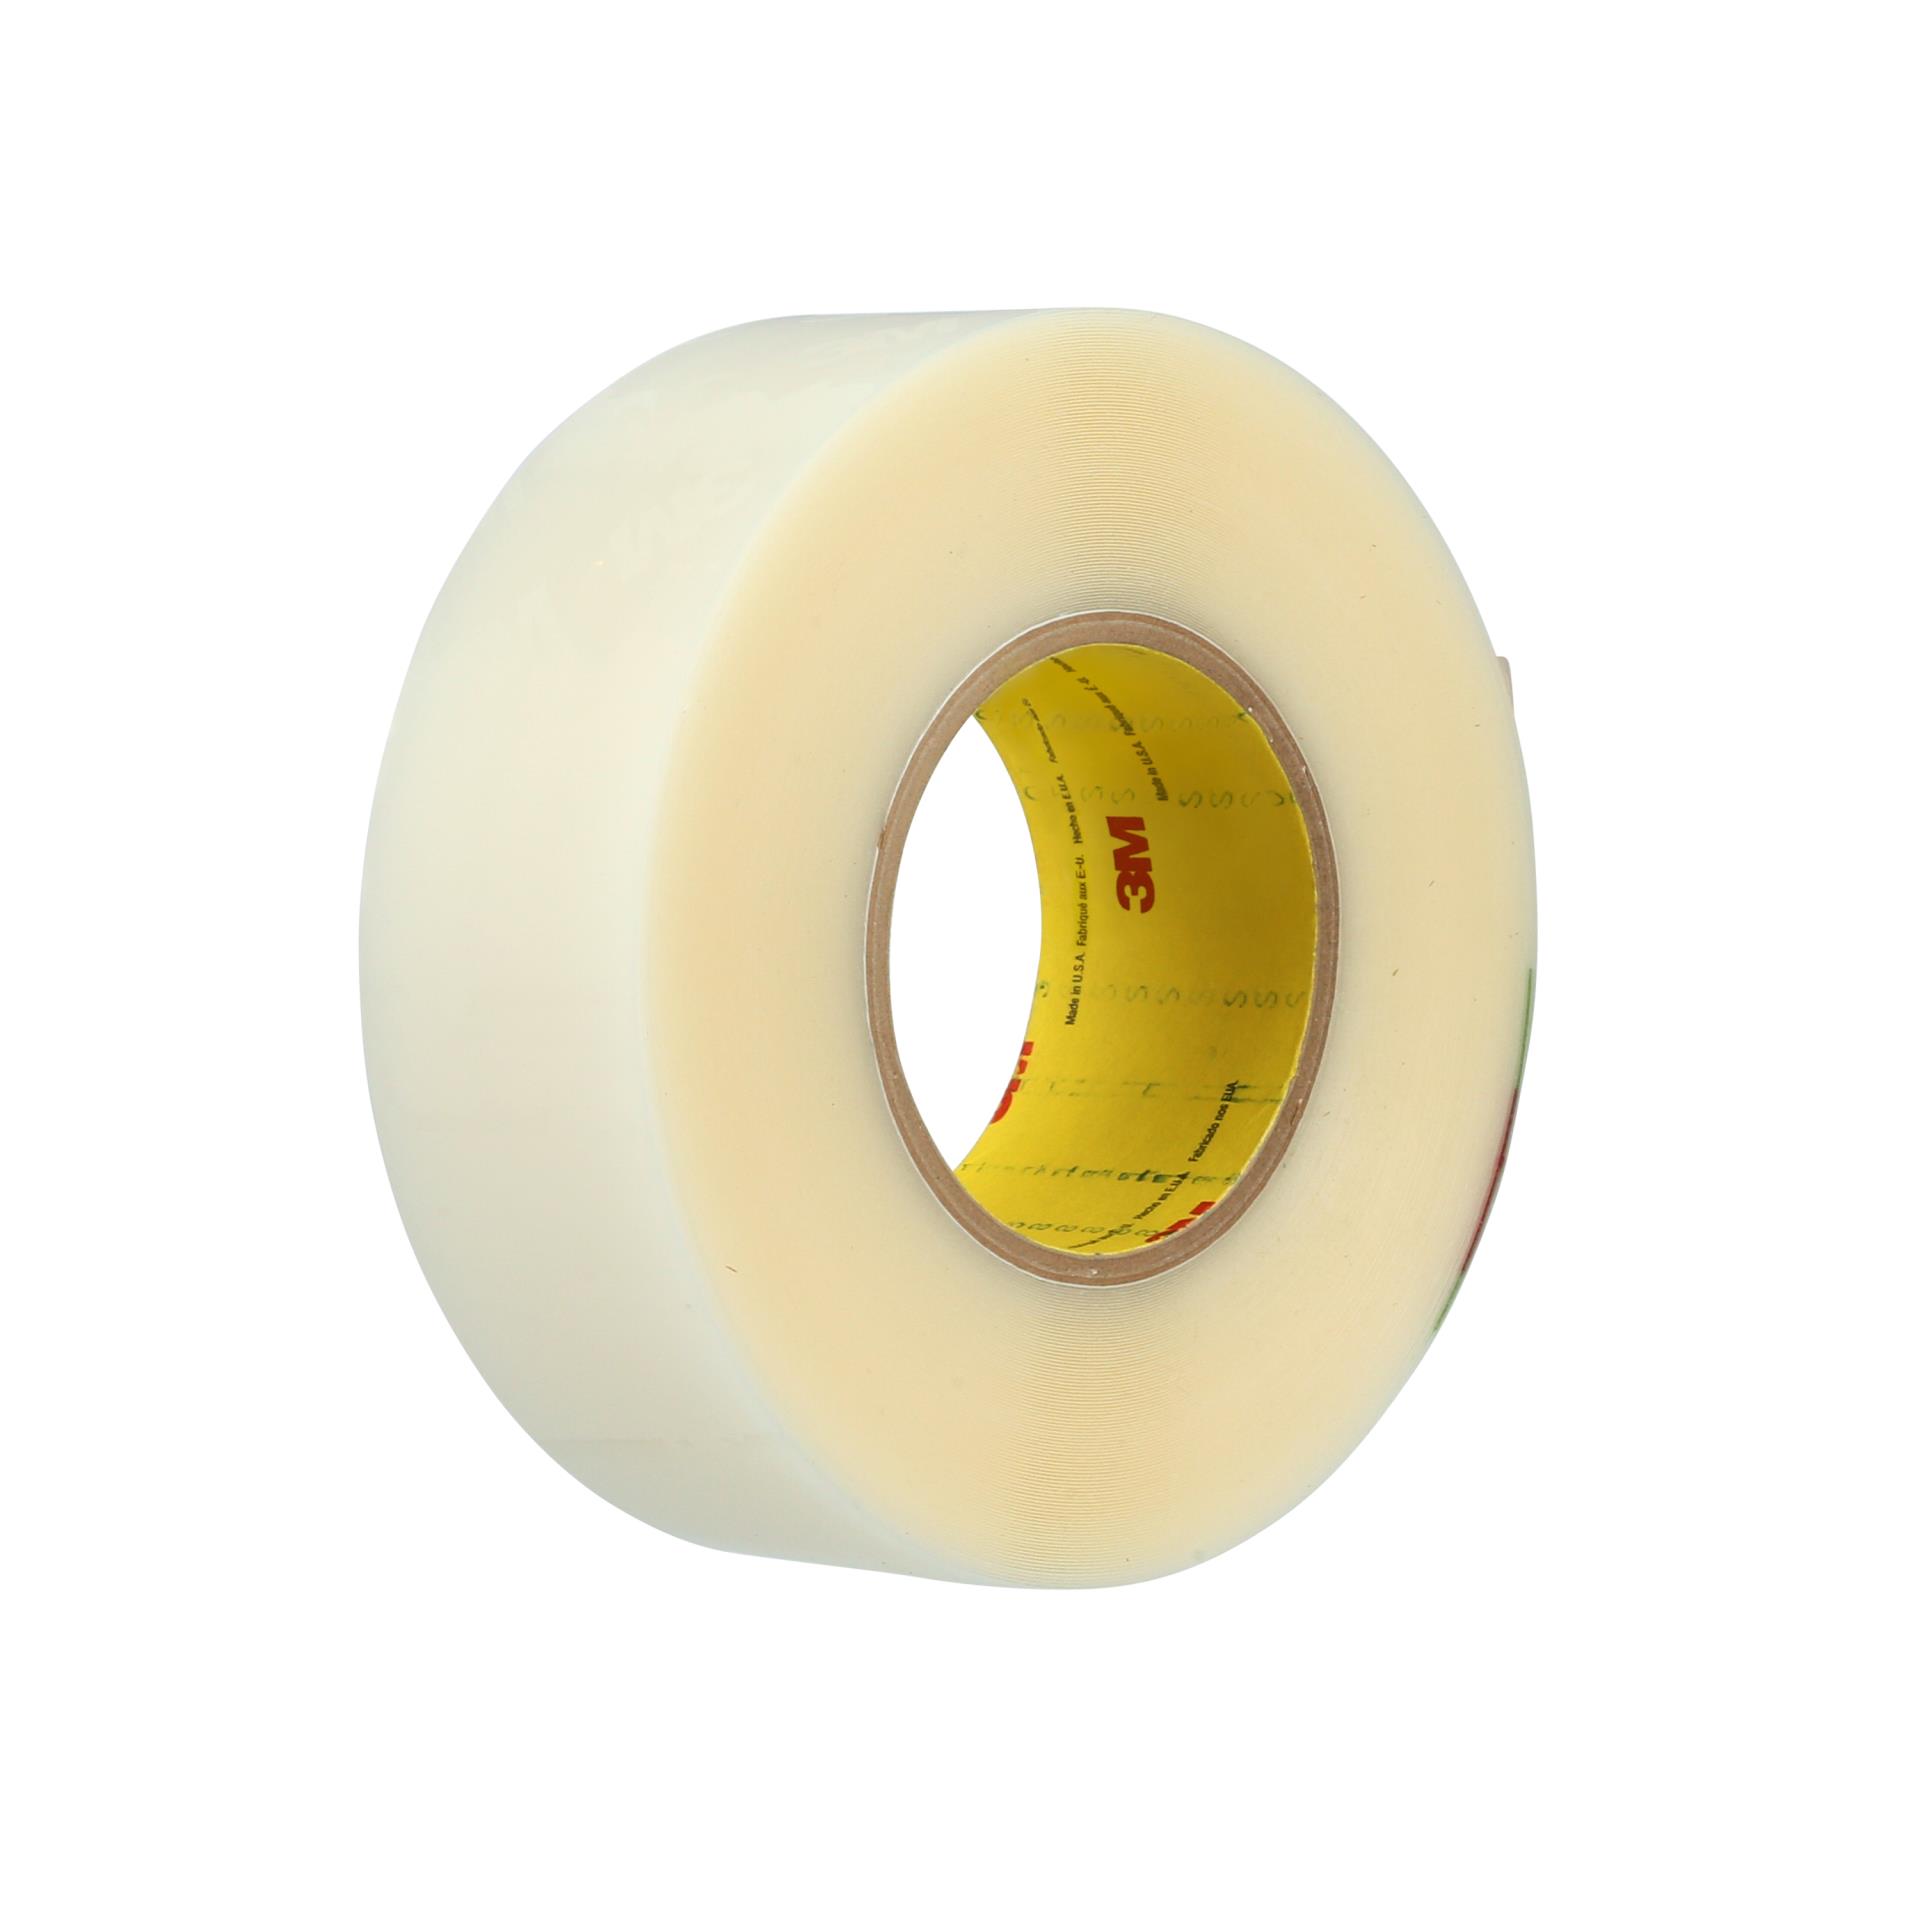 3M™ Polyurethane Protective Tape 8681HS 36320 Light Gray, Skip Slit Liner,  12 in x yd, Roll/Case, Sample Aircraft 9382072